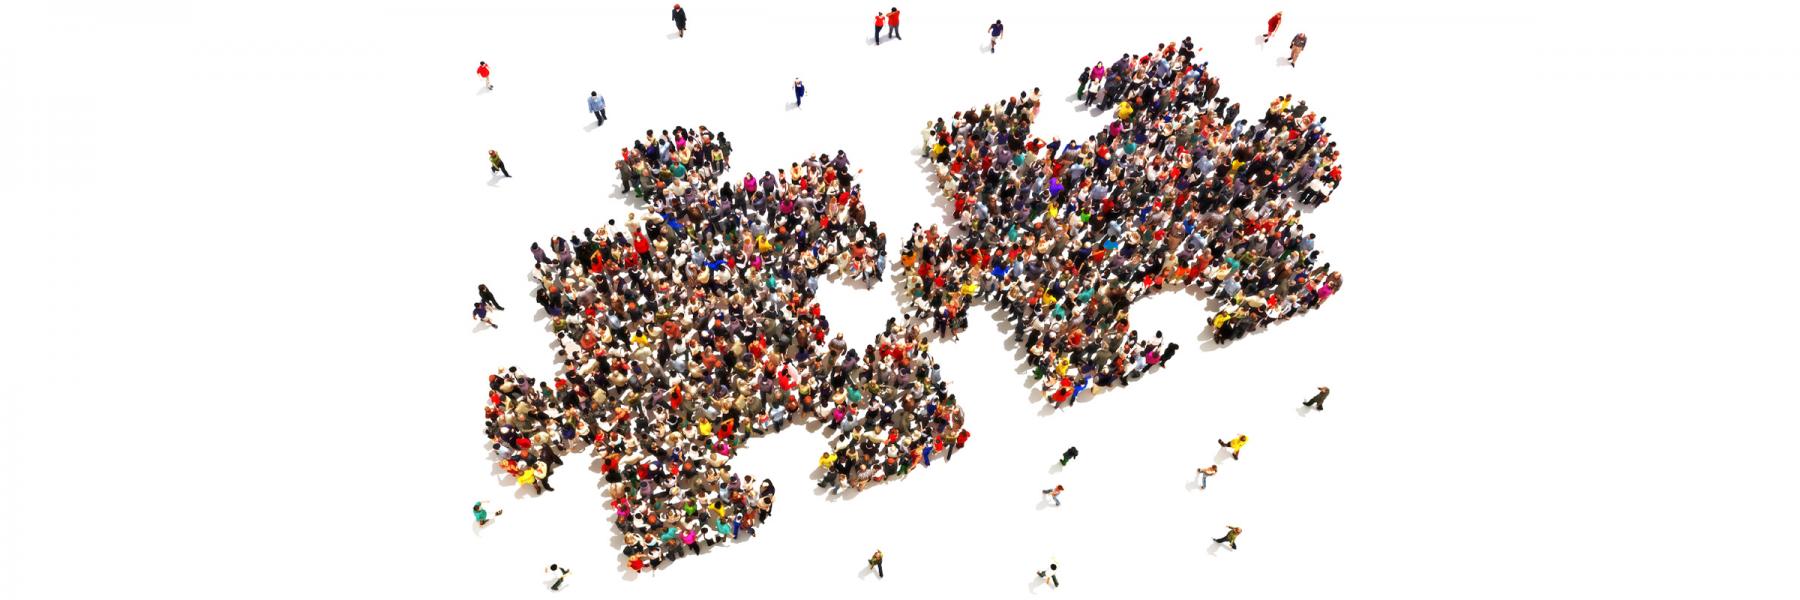 two interlocking jigsaw puzzle pieces comprised of two crowds of people